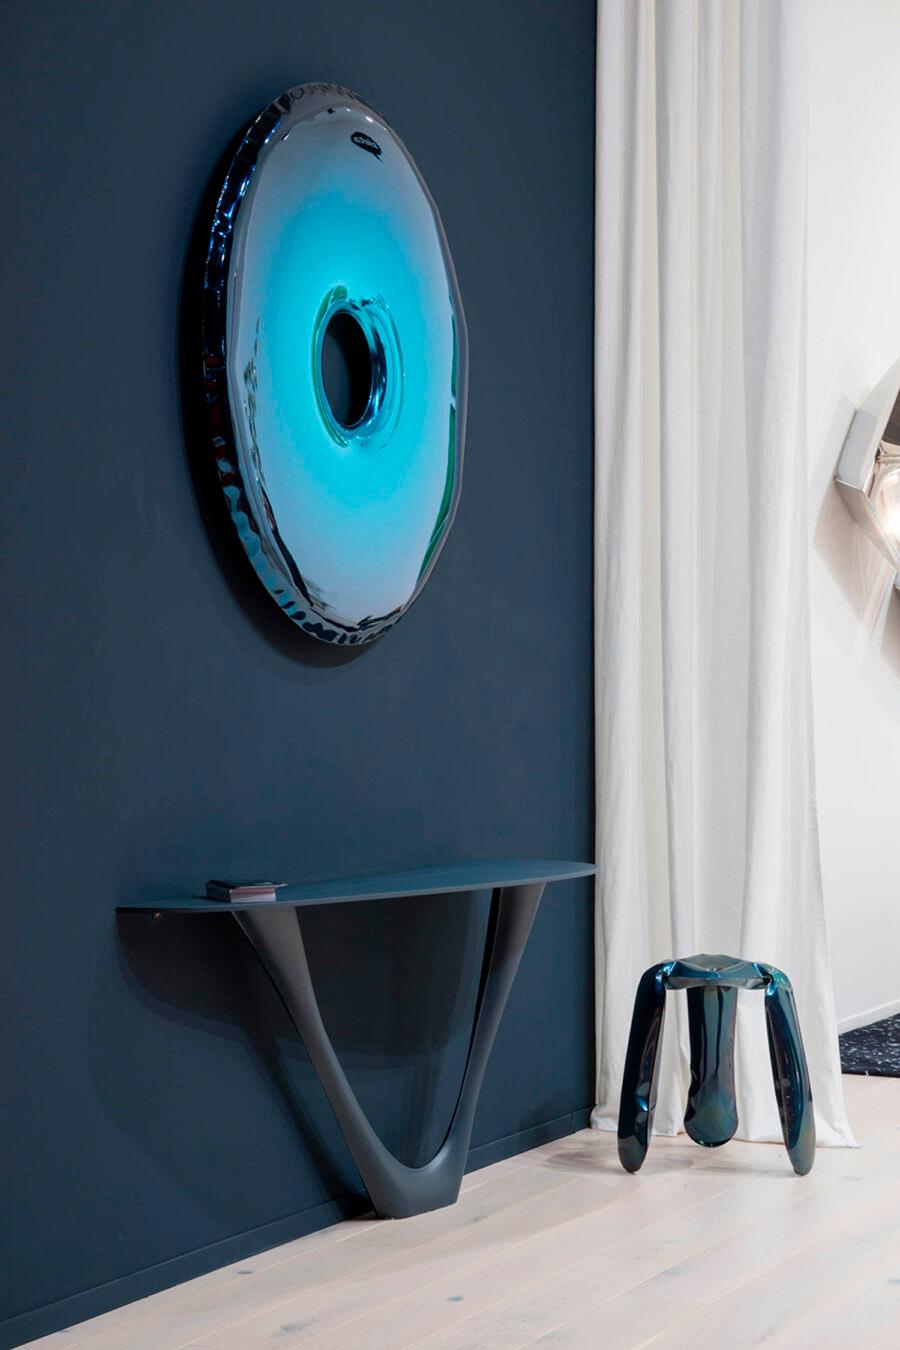 Rondo mirror 'Deep Space Blue' by Zieta Prozessdesign
Gradient collection, Deep space blue

Stainless steel
Measures: 150 x 6 cm.

Several sizes available: 
Diameter: 75 cm / 95 cm / 150 cm
(120cm: sold out)



Zieta is best known for his collection